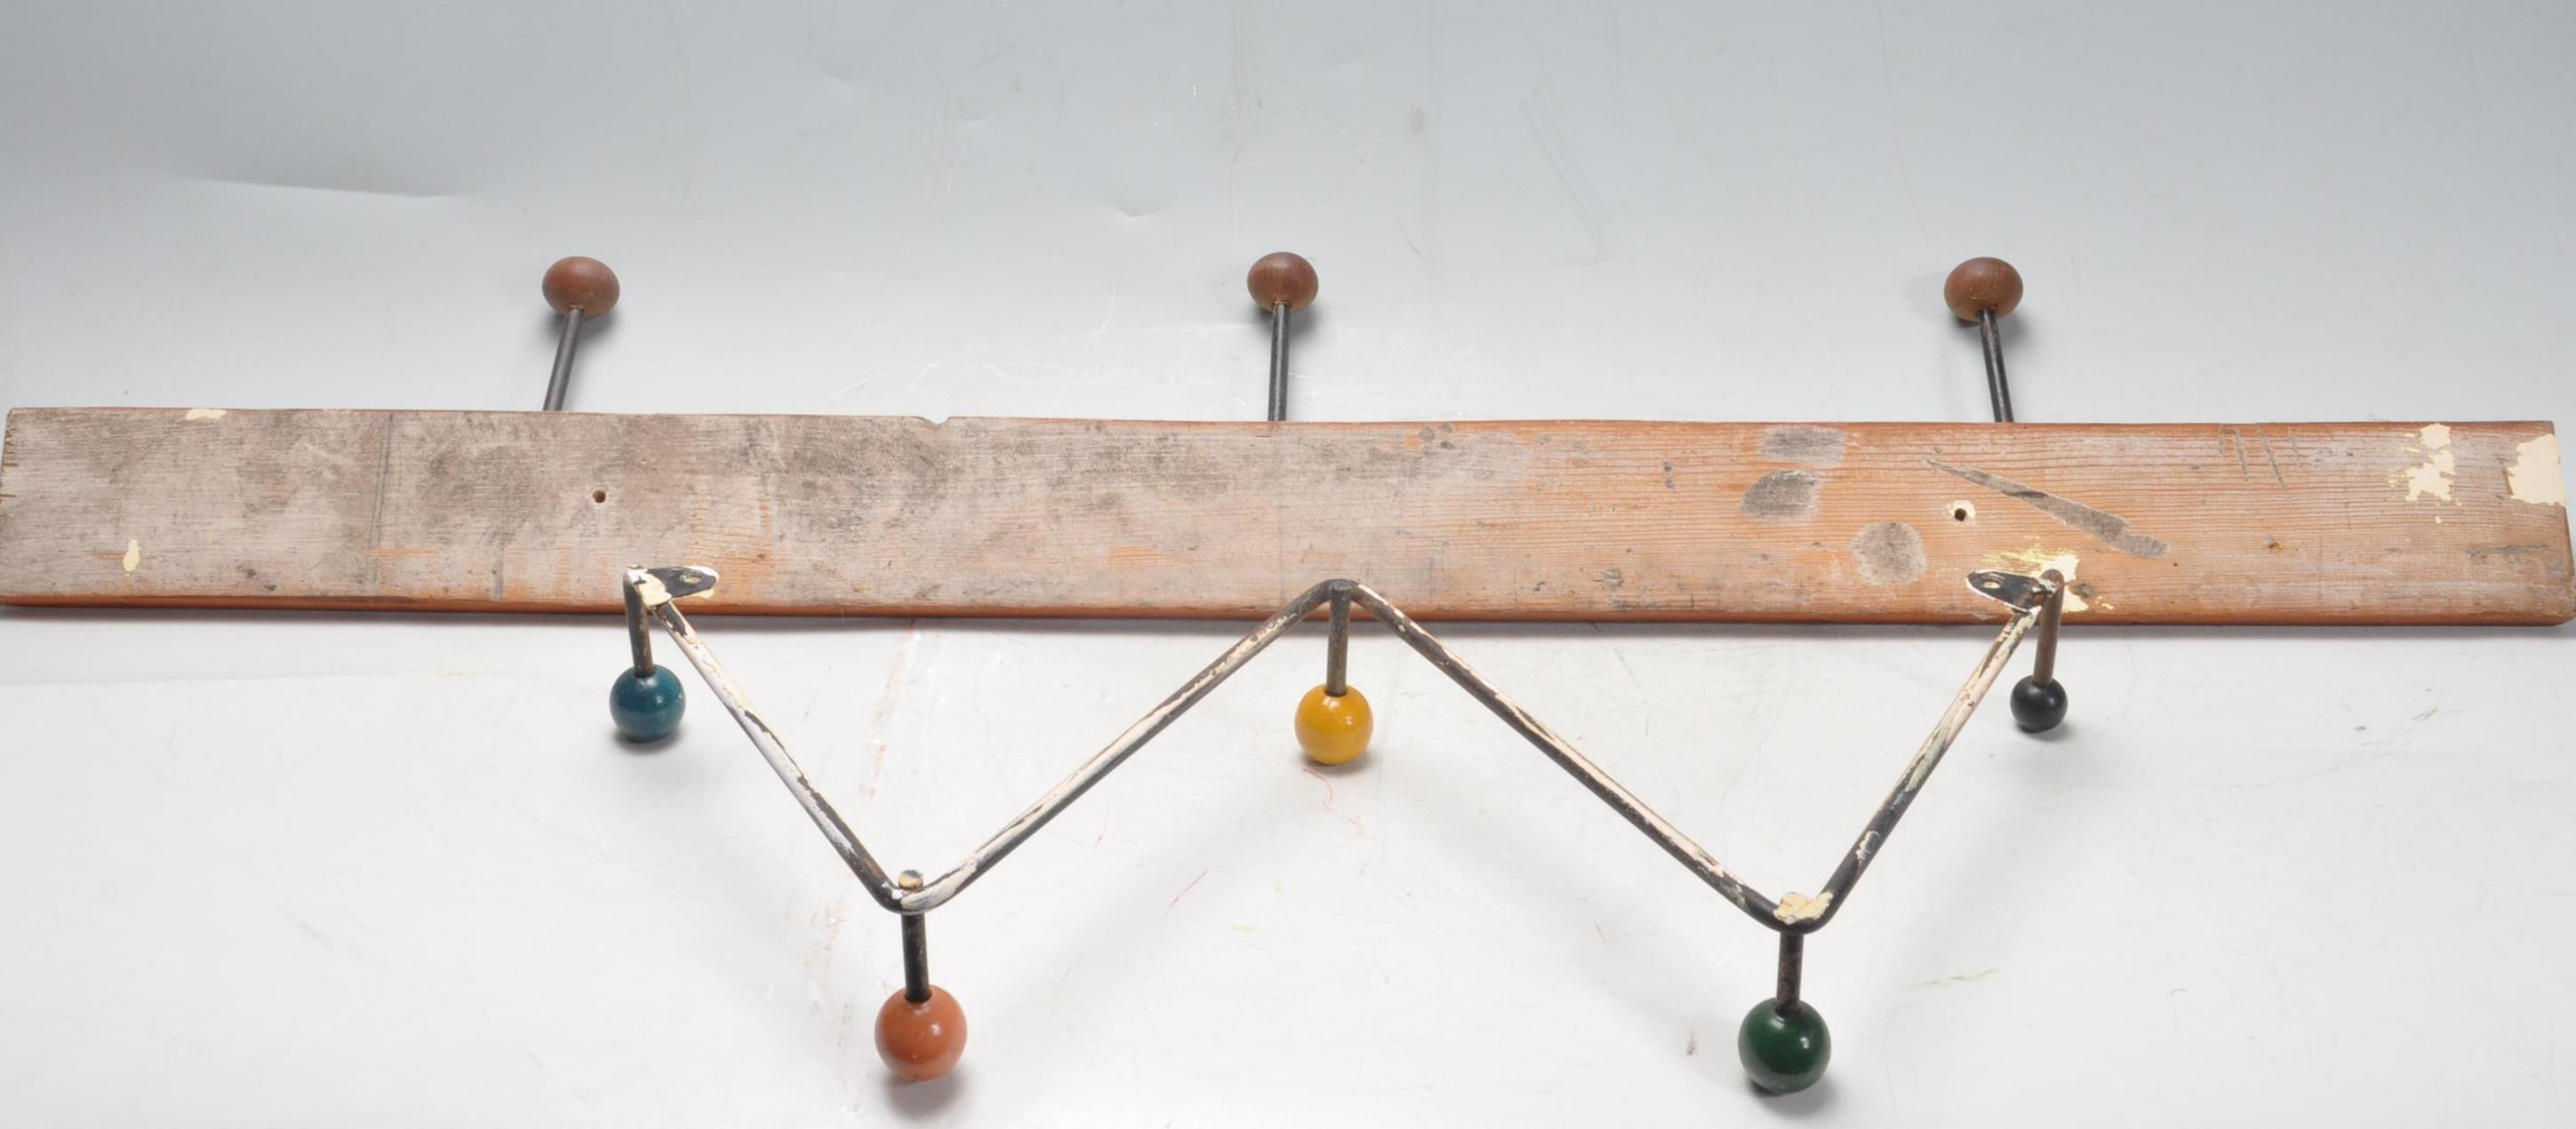 TWO VINTAGE RETRO ATOMIC WALL MOUTHED COAT HOOKS - Image 2 of 2